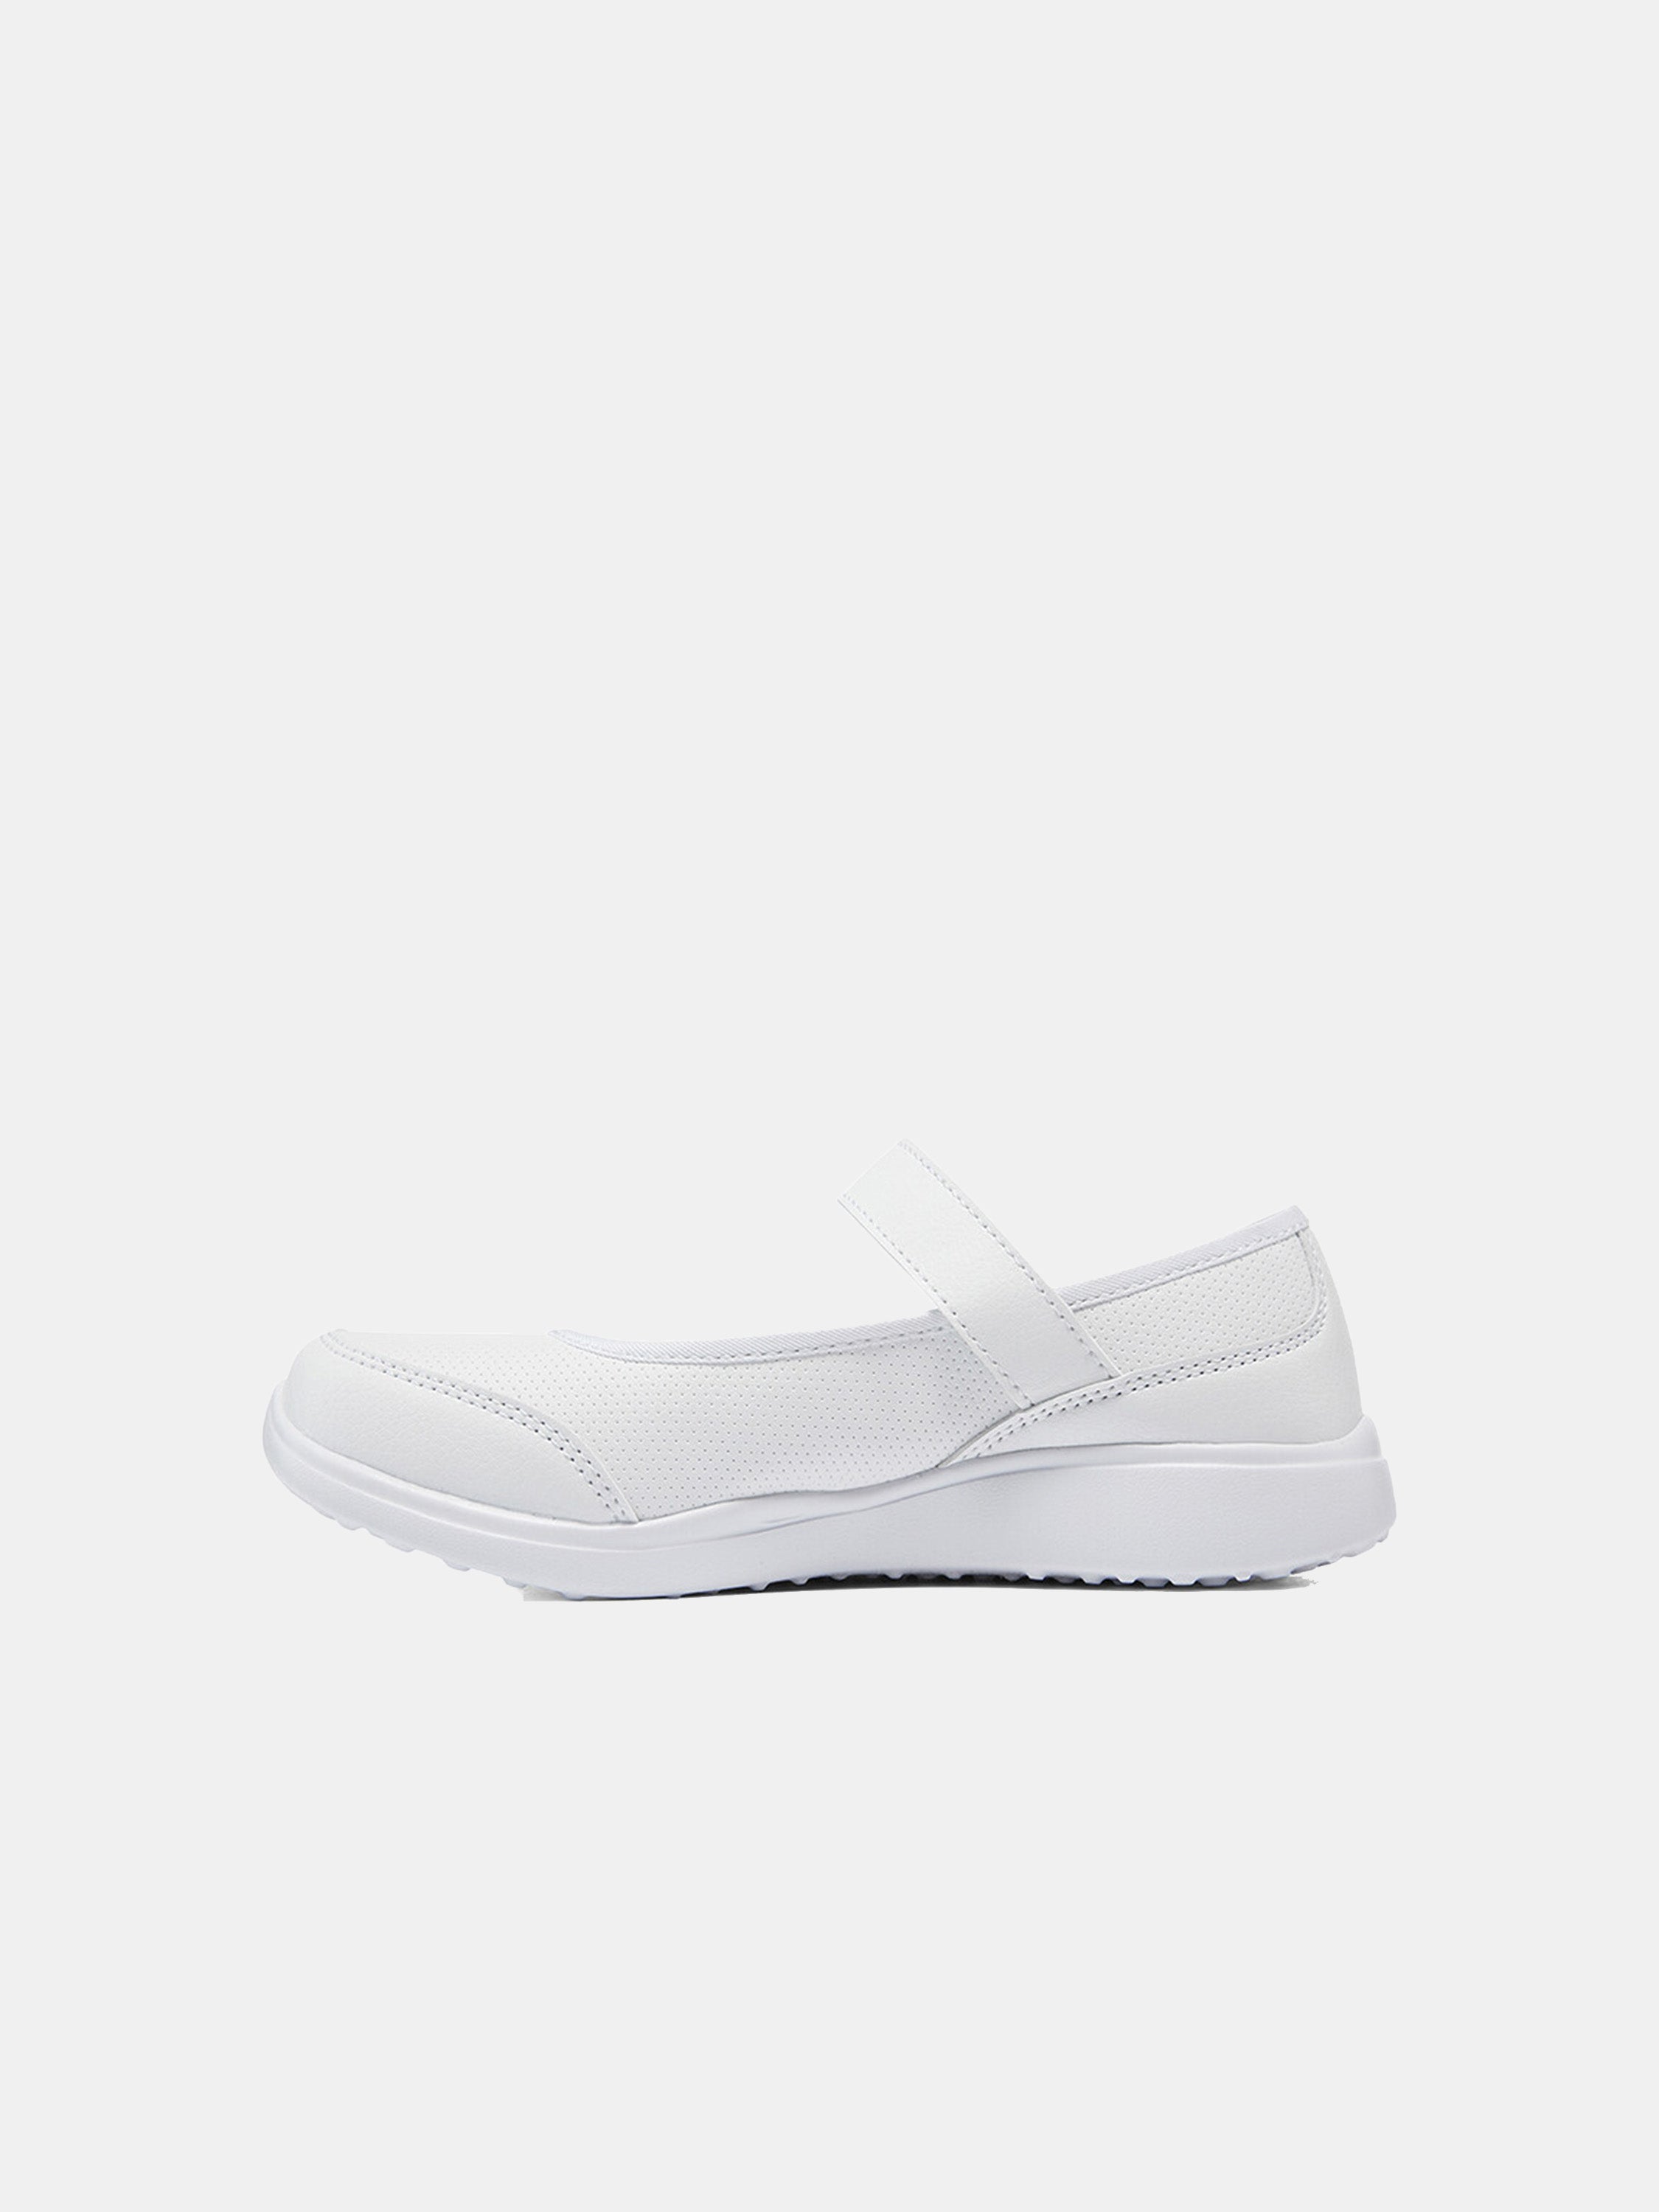 Skechers Girls Microstrides - Class Spirit School Shoes #color_White